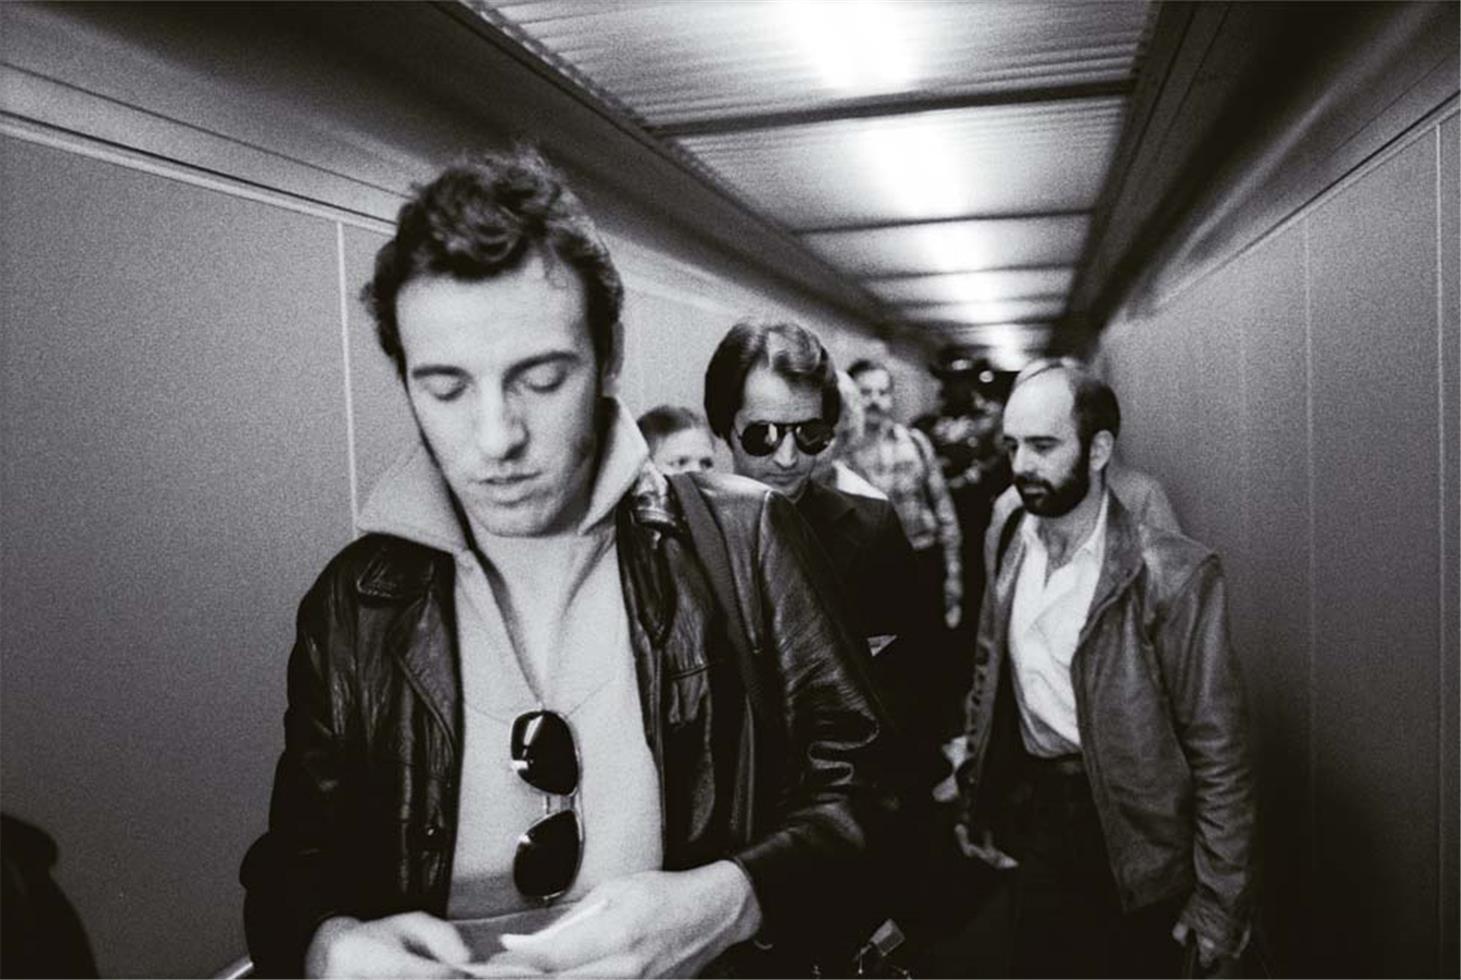 Jim Marchese Black and White Photograph - Airport Tunnel, Bruce Springsteen